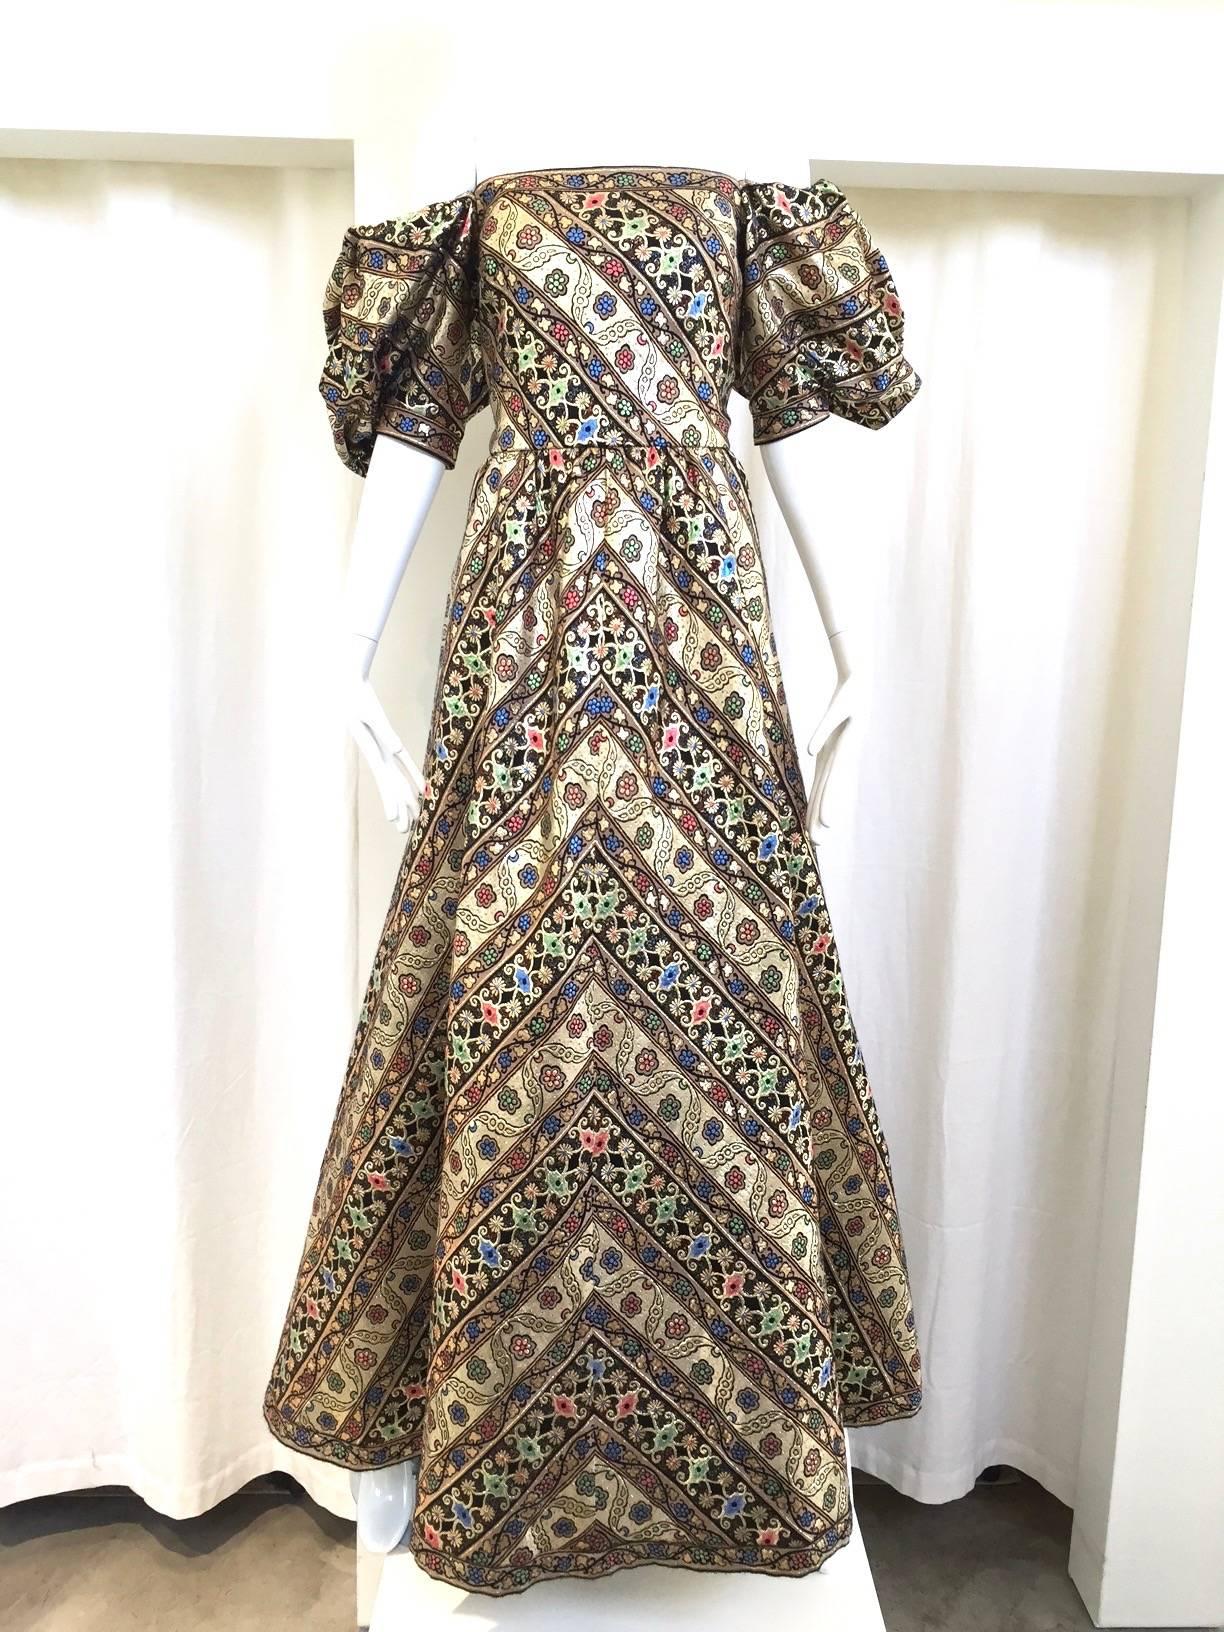 Beautiful 1980s Vintage Leonard Paris floral metallic silk brocade gown with dramatic sleeve. Vibrant gold, blue, pink and green rich metallic color. Dress can be worn off shoulder. This dress is in excellent condition ( barely worn) and perfect for